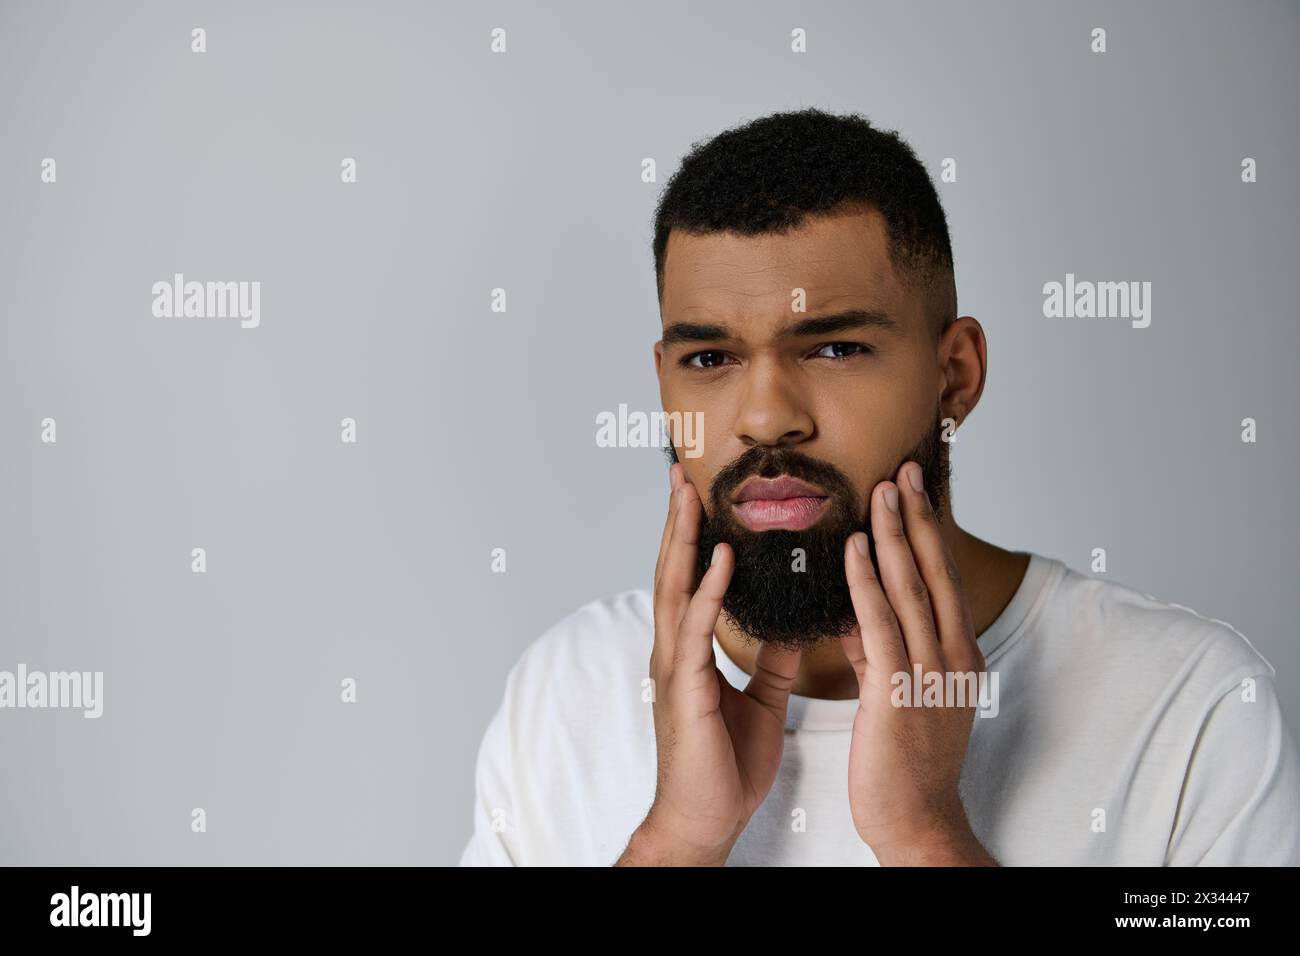 Handsome man with beard savoring his skincare routine. Stock Photo